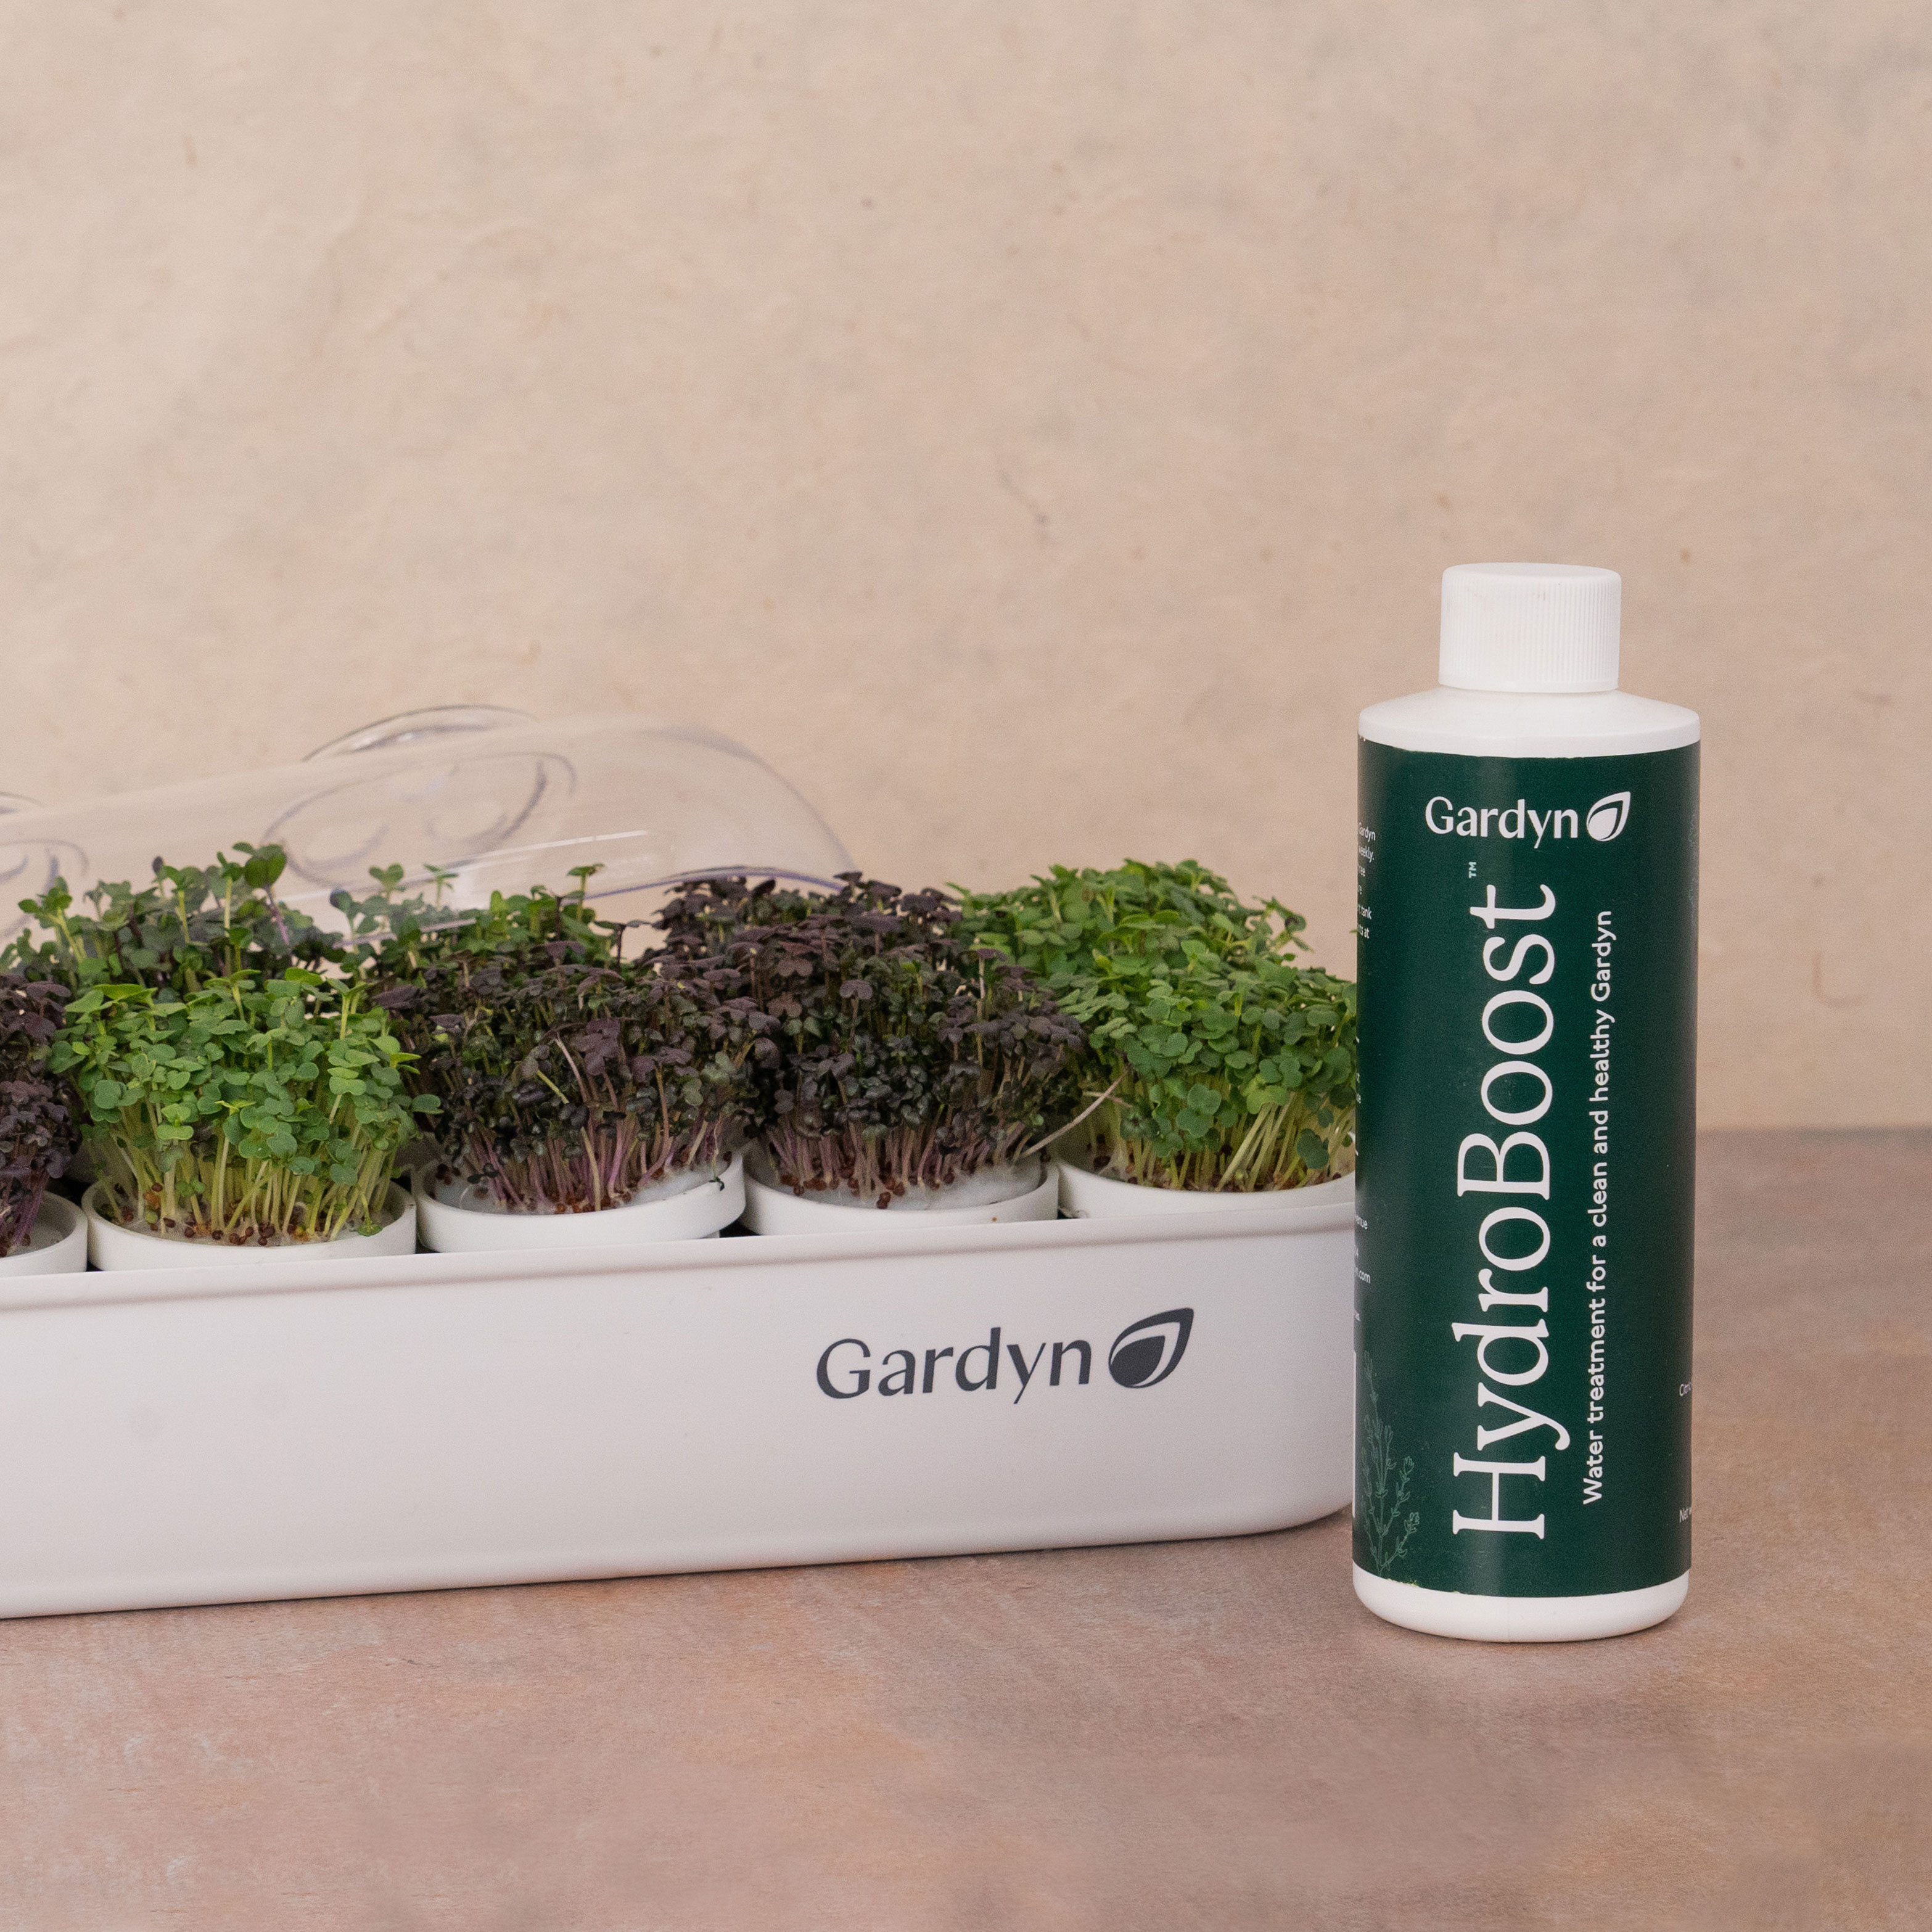 Gardyn Microgreens complete kit and hydroboost on a brown table with brown background.